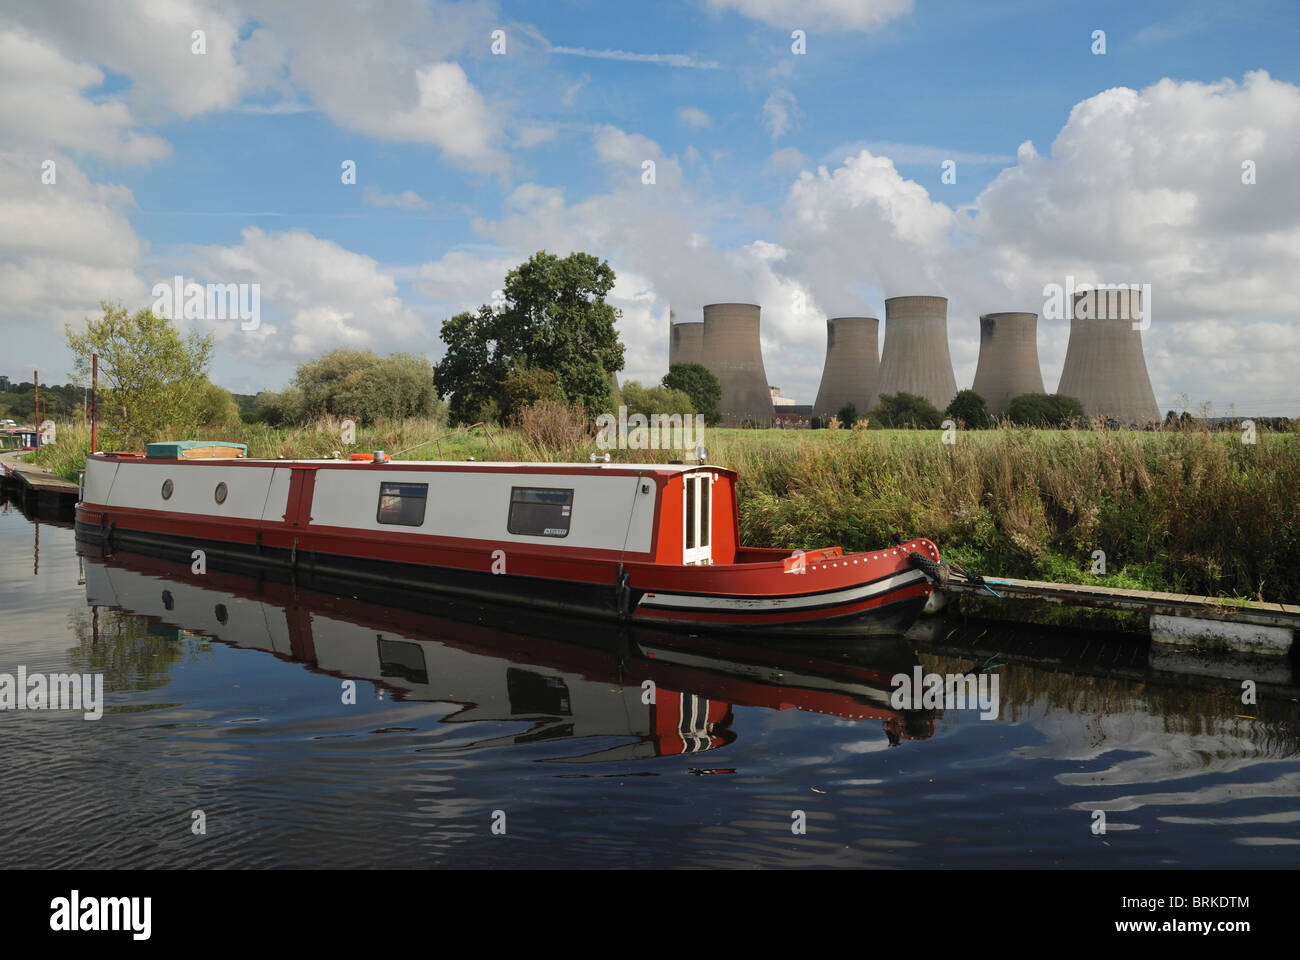 A narrrowboat on the River Soar with the Ratcliffe-on-Soar Power Station in the background. Nottinghamshire, England. Stock Photo